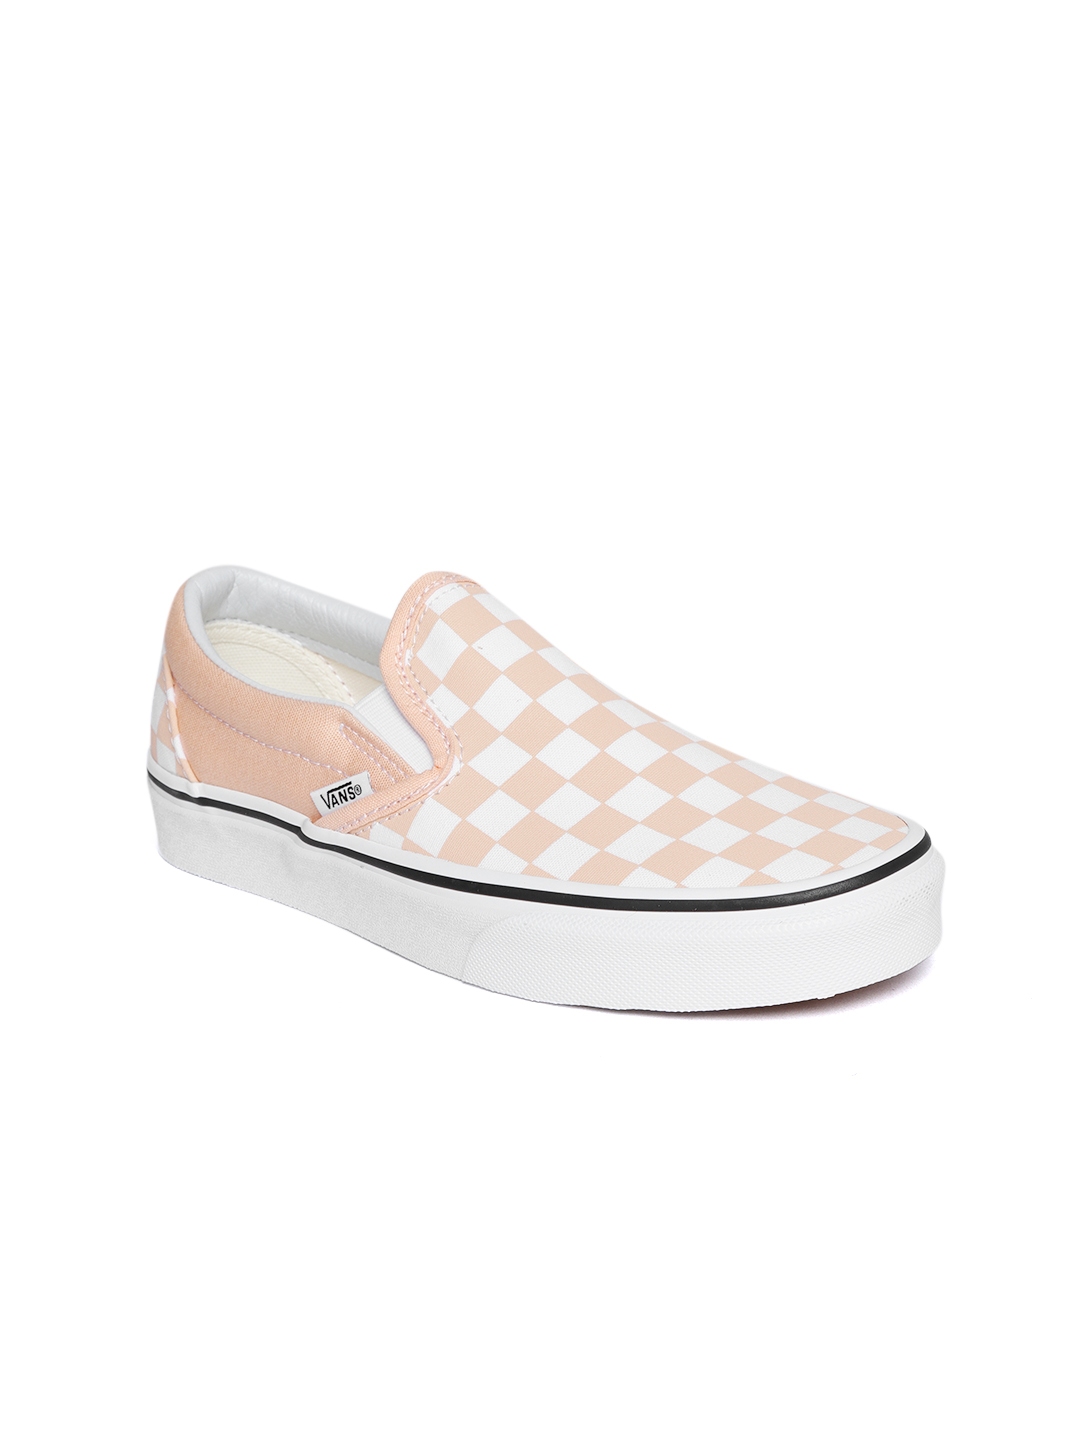 Buy Vans Women Peach Coloured & White Checked Slip On Sneakers - Casual ...